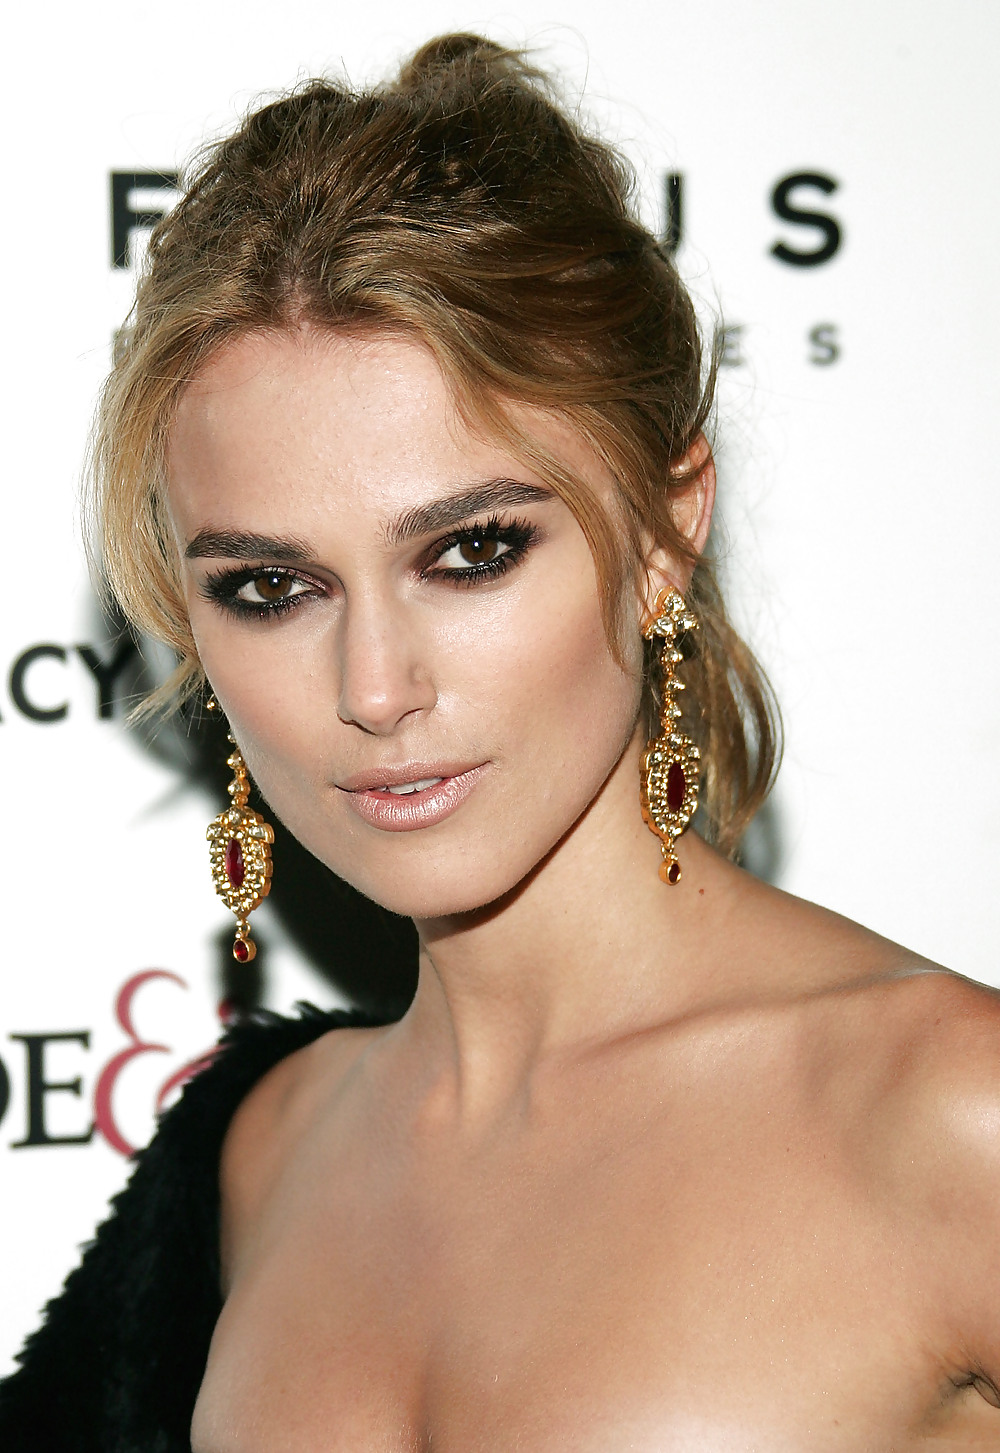 Keira Knightley the royal lady of england
 #35650445